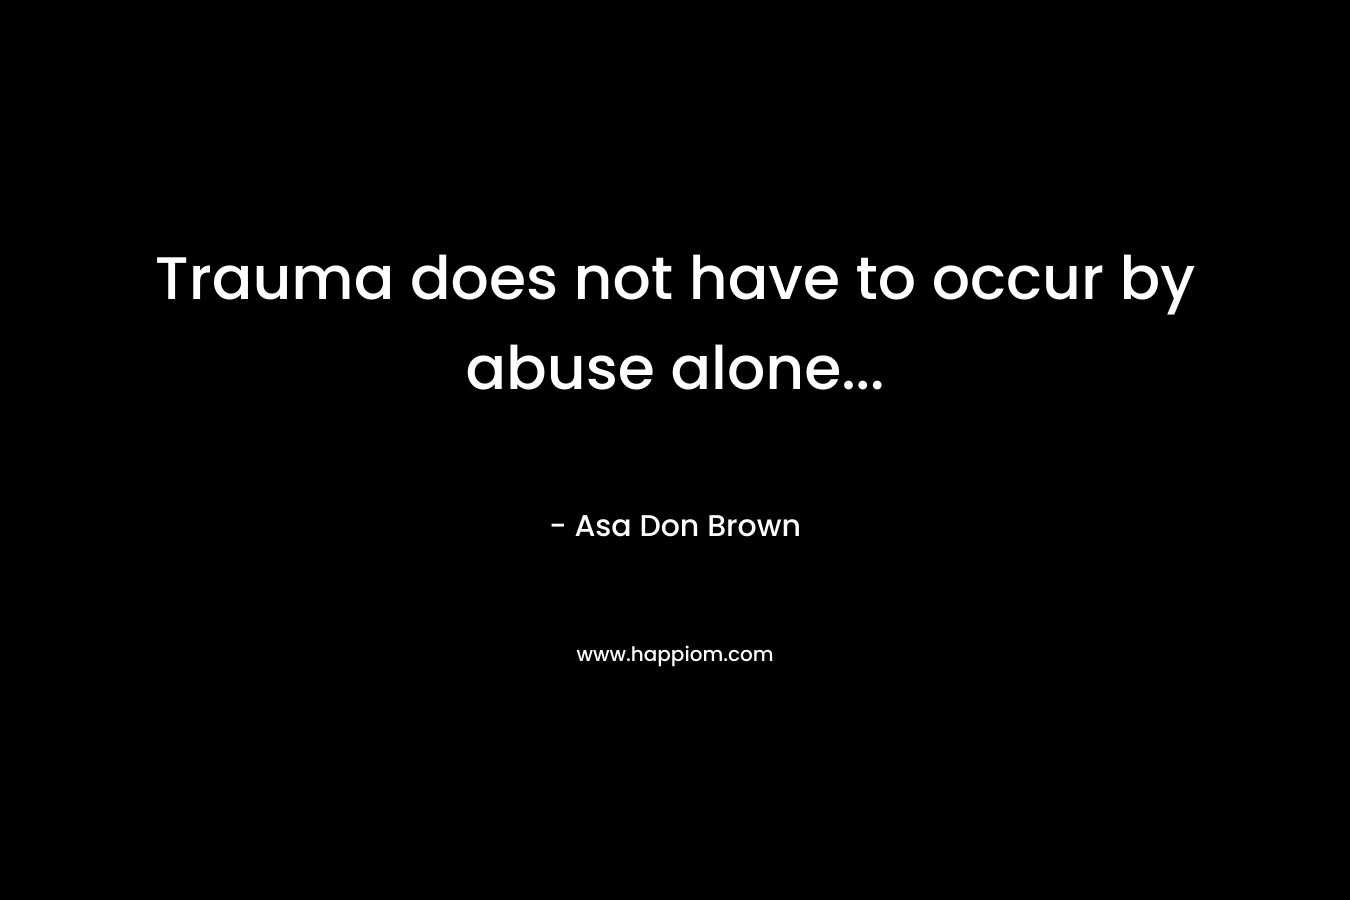 Trauma does not have to occur by abuse alone...